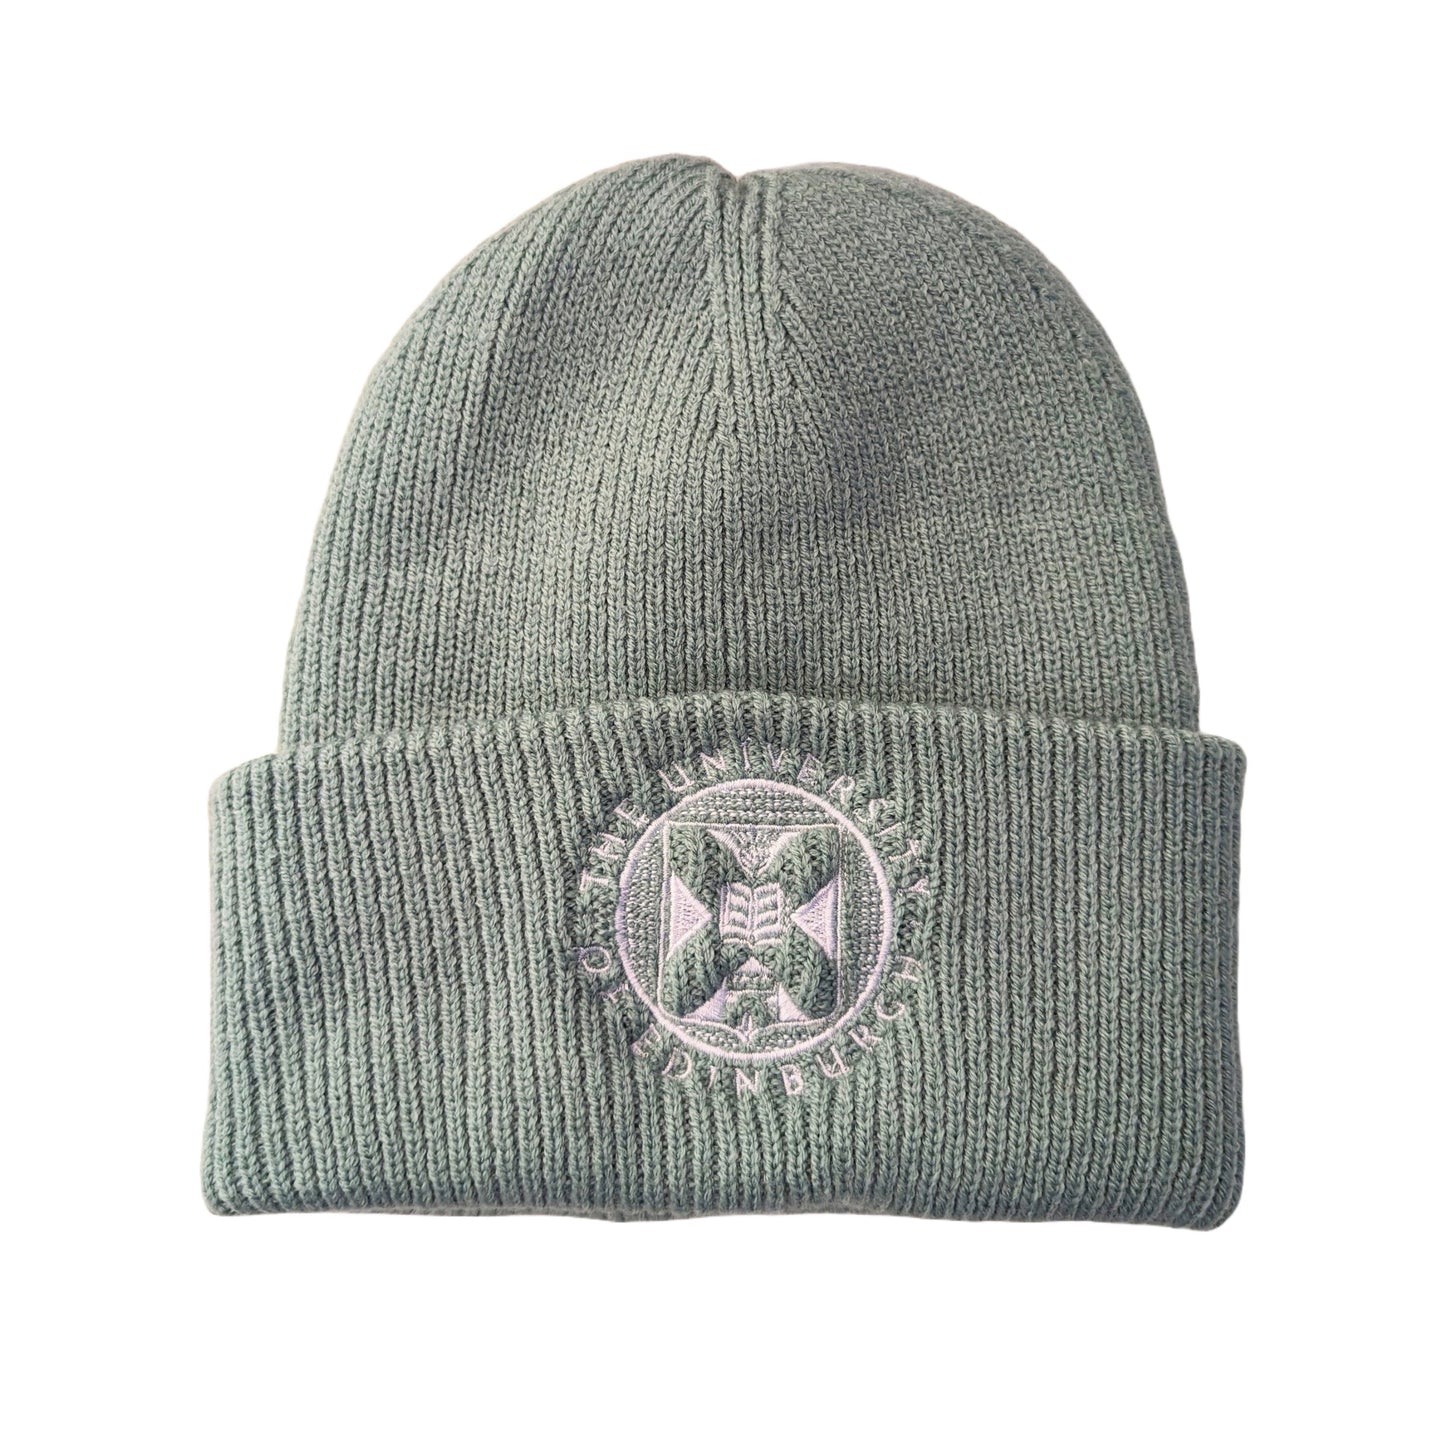 sage green ribbed cotton beanie with white embroidered university crest